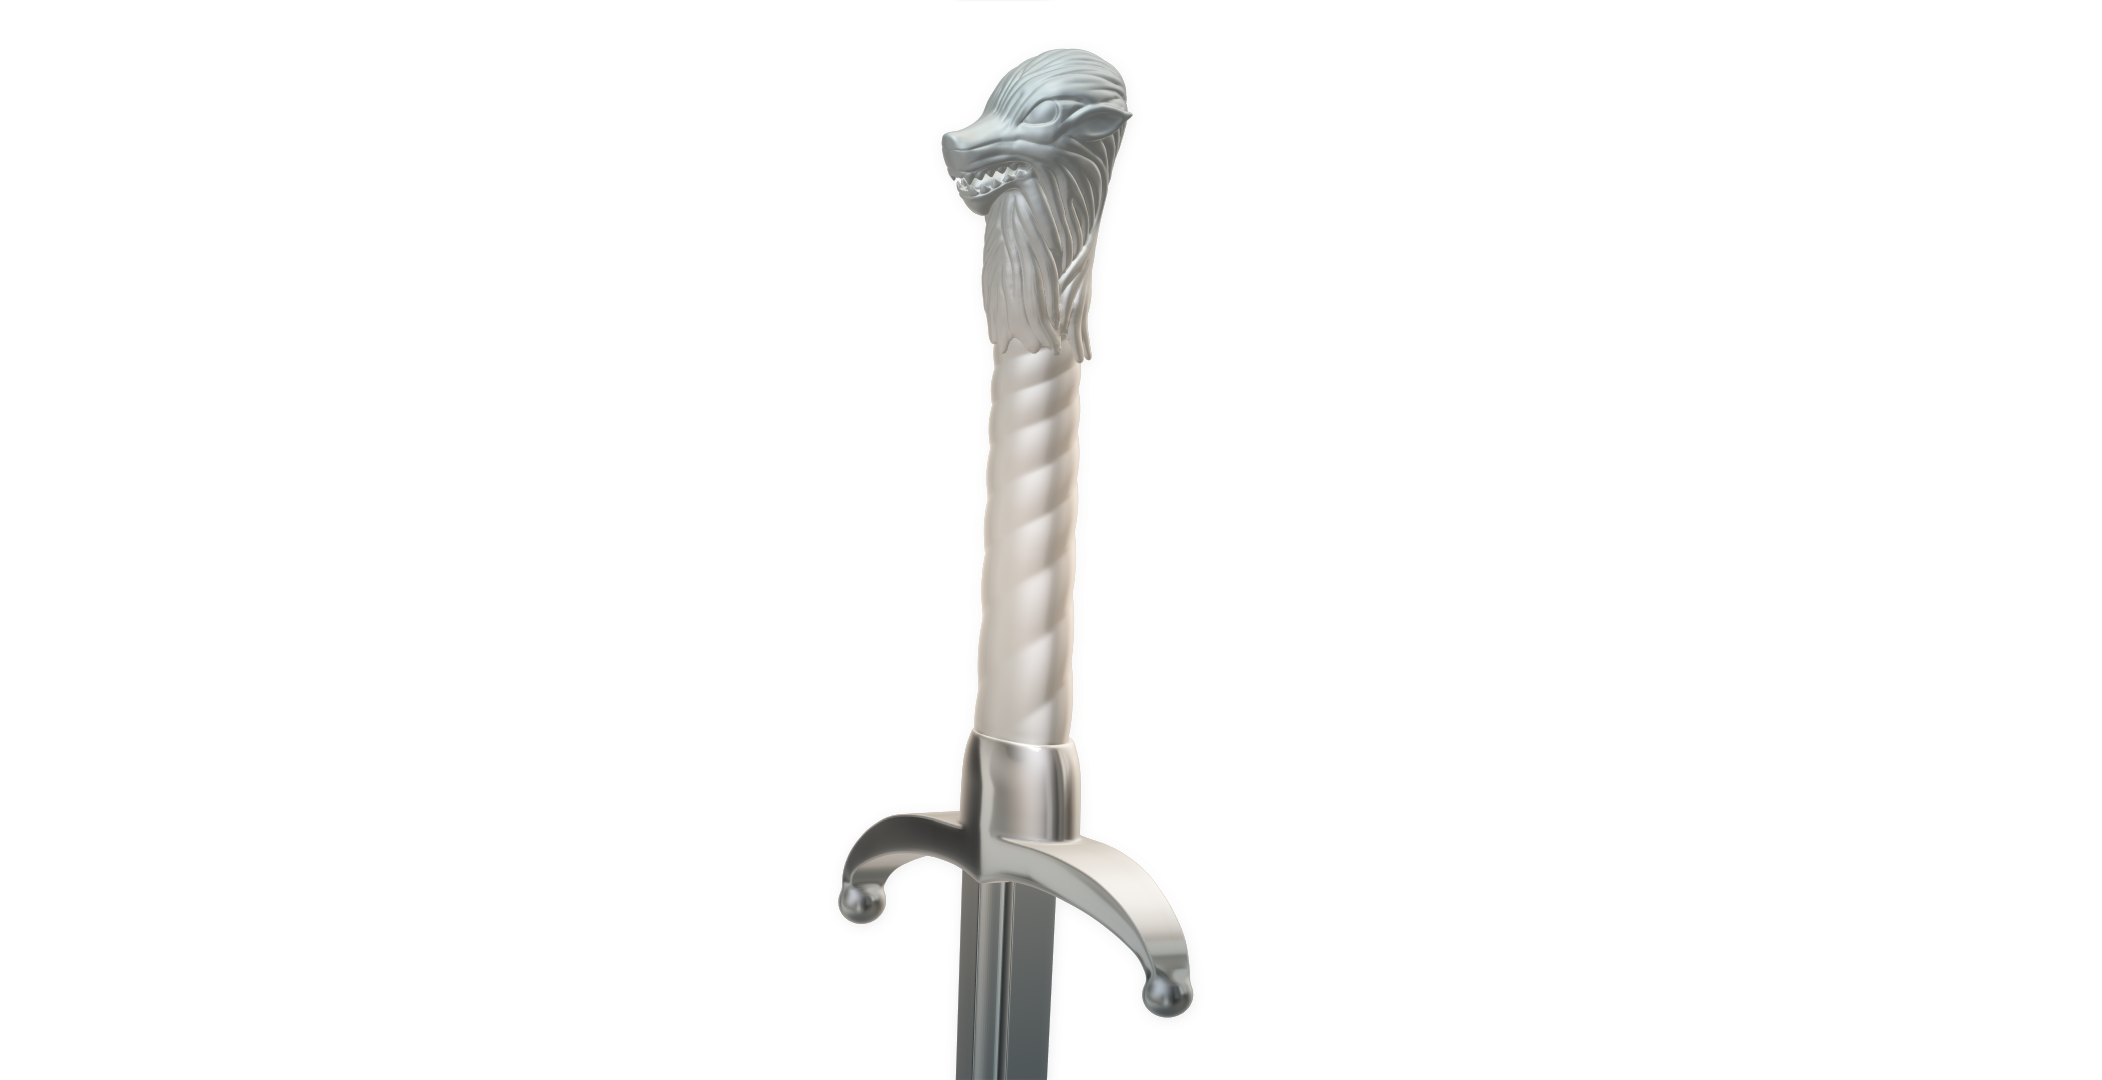 3D-model for 3d-printing of longclaw sword of jon snow of game of thrones